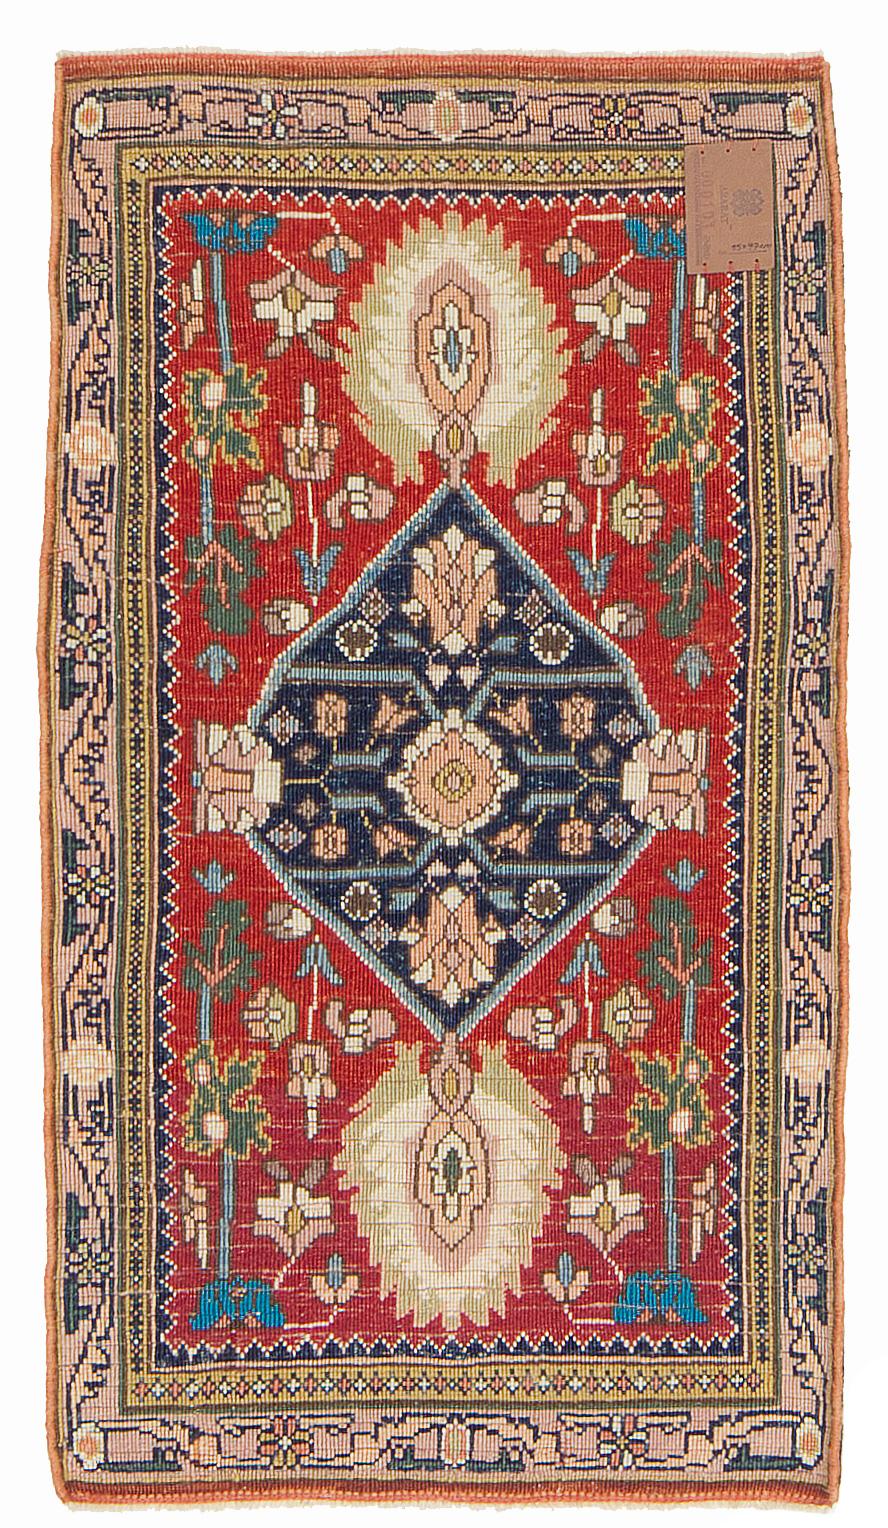 The most dramatic of the Gerous ( Garrus, Gerus, Garus ) carpets are those with an “asymmetric” design. Only a section of the original is shown, in the same way, many Lotto carpets were woven. It is difficult to guess the size of these carpets from